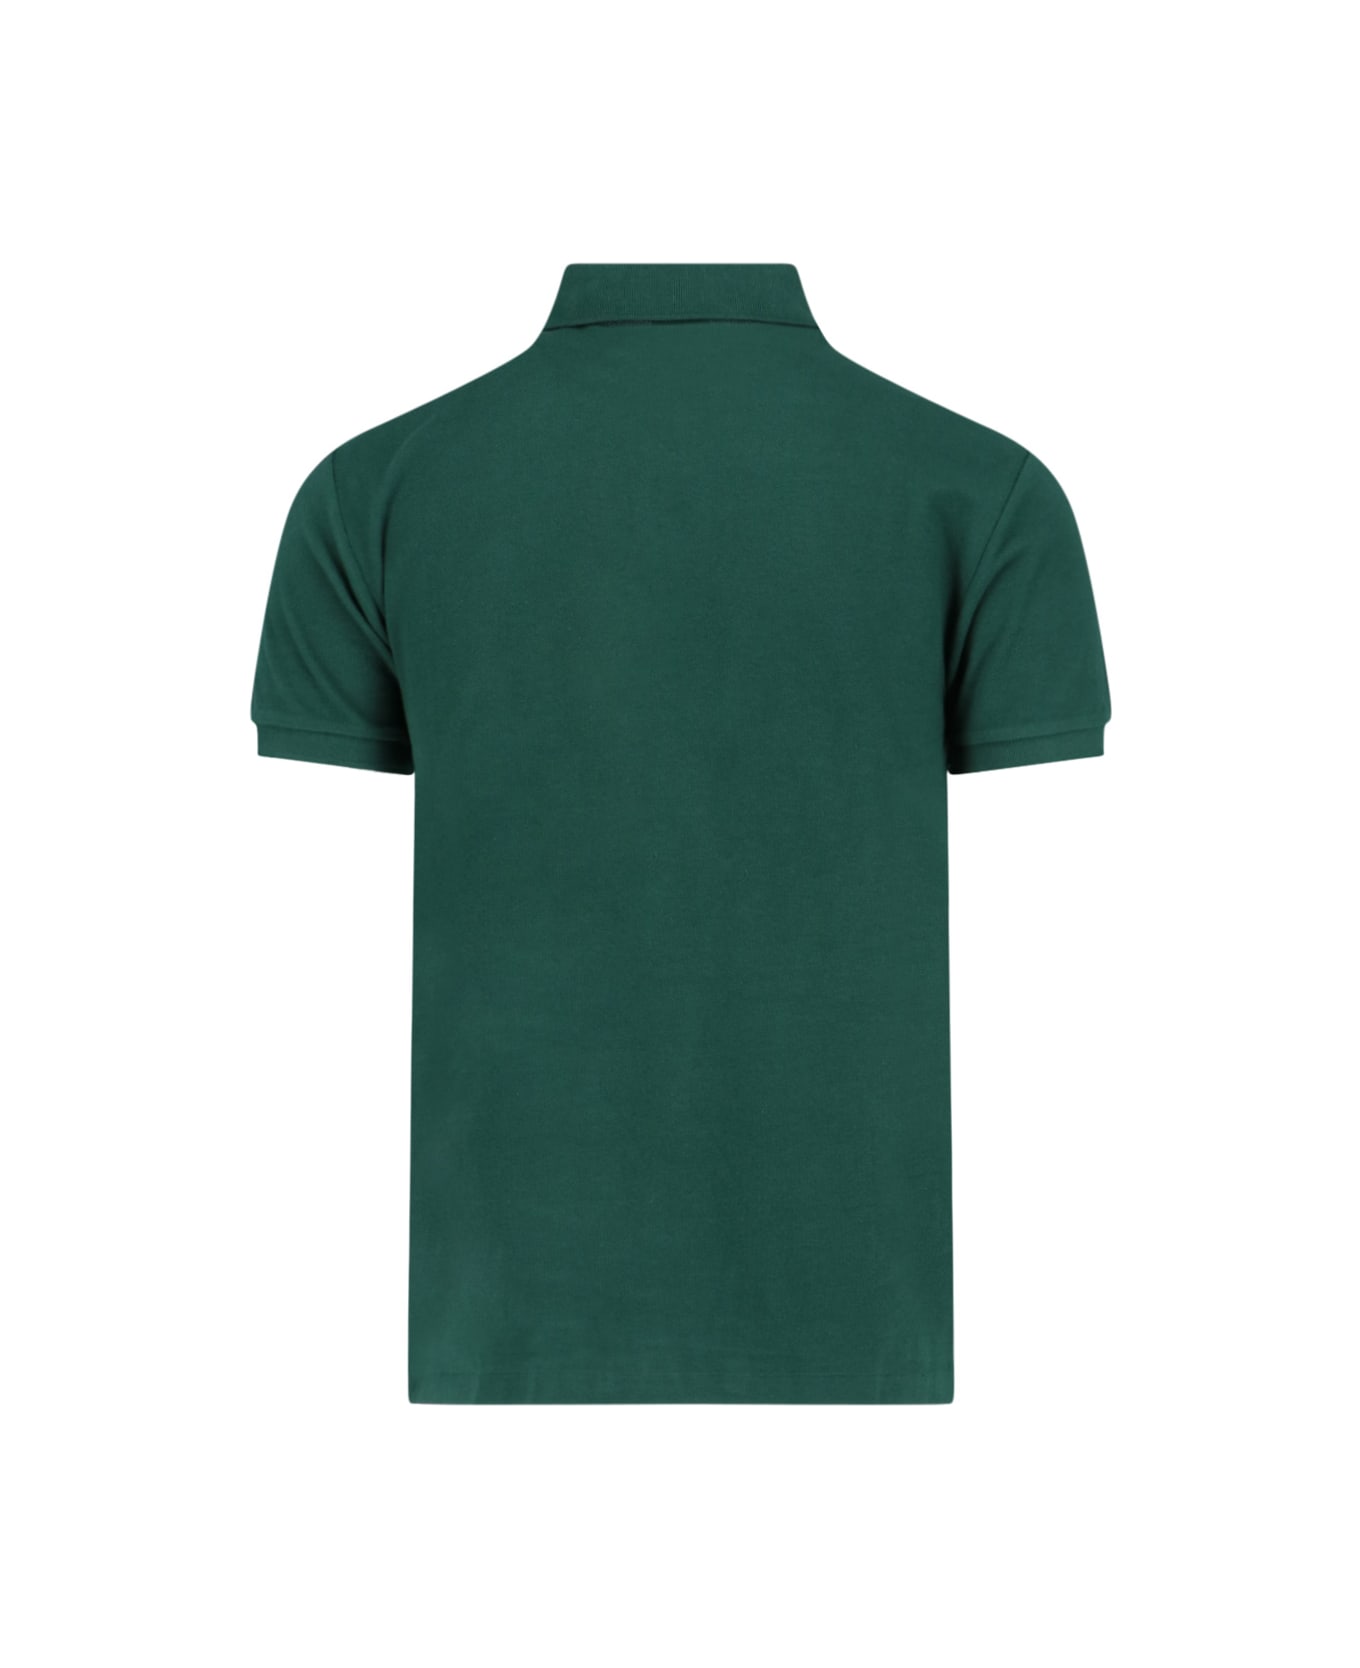 Ralph Lauren Forest Green And Red Slim-fit Piquet Polo Shirt - Green ポロシャツ